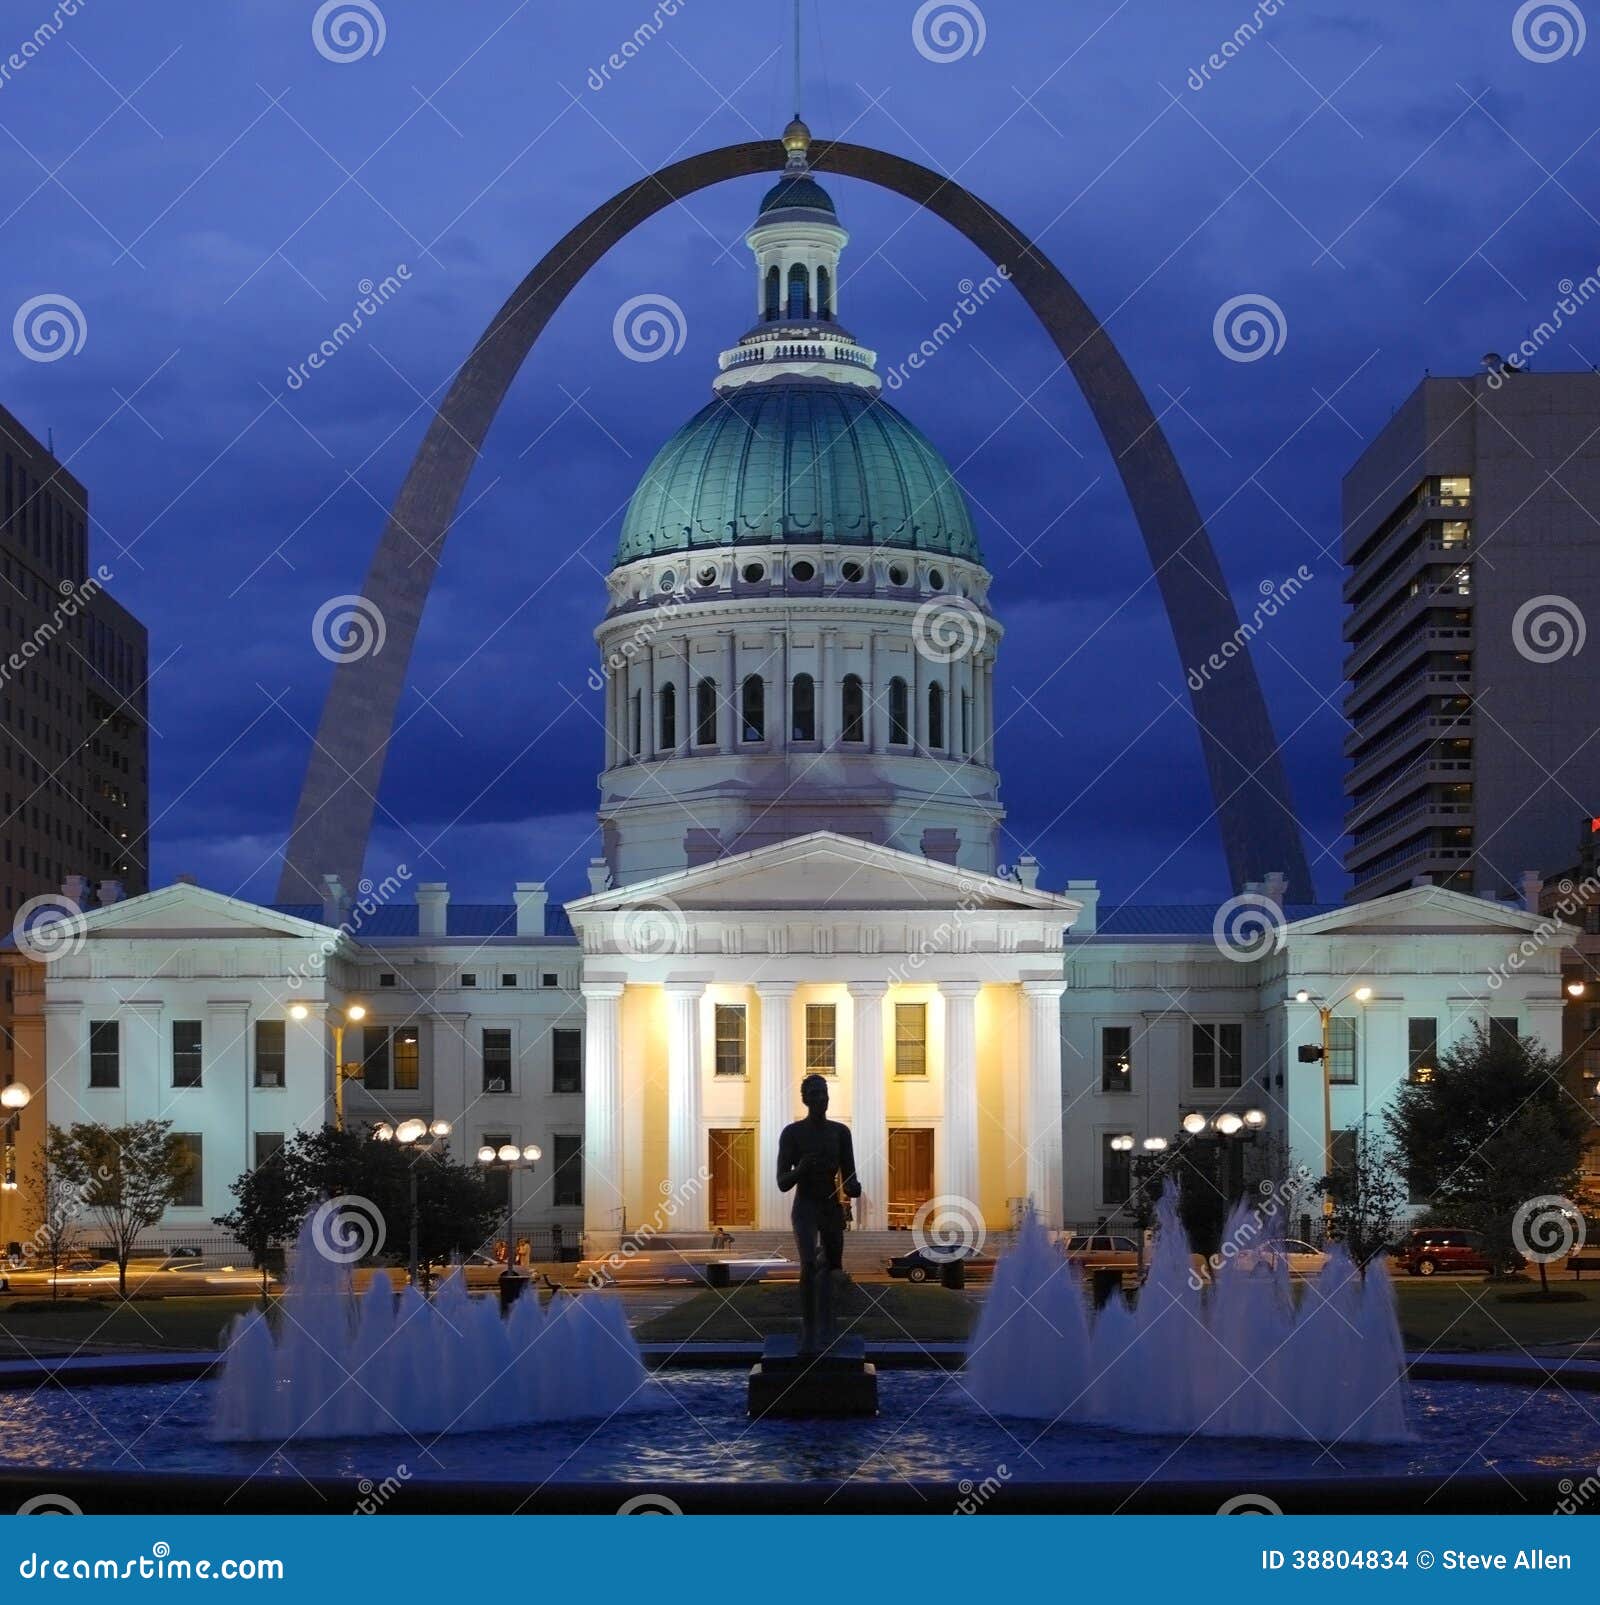 St Louis - Missouri - United States Of America Stock Photo - Image of louis, national: 38804834